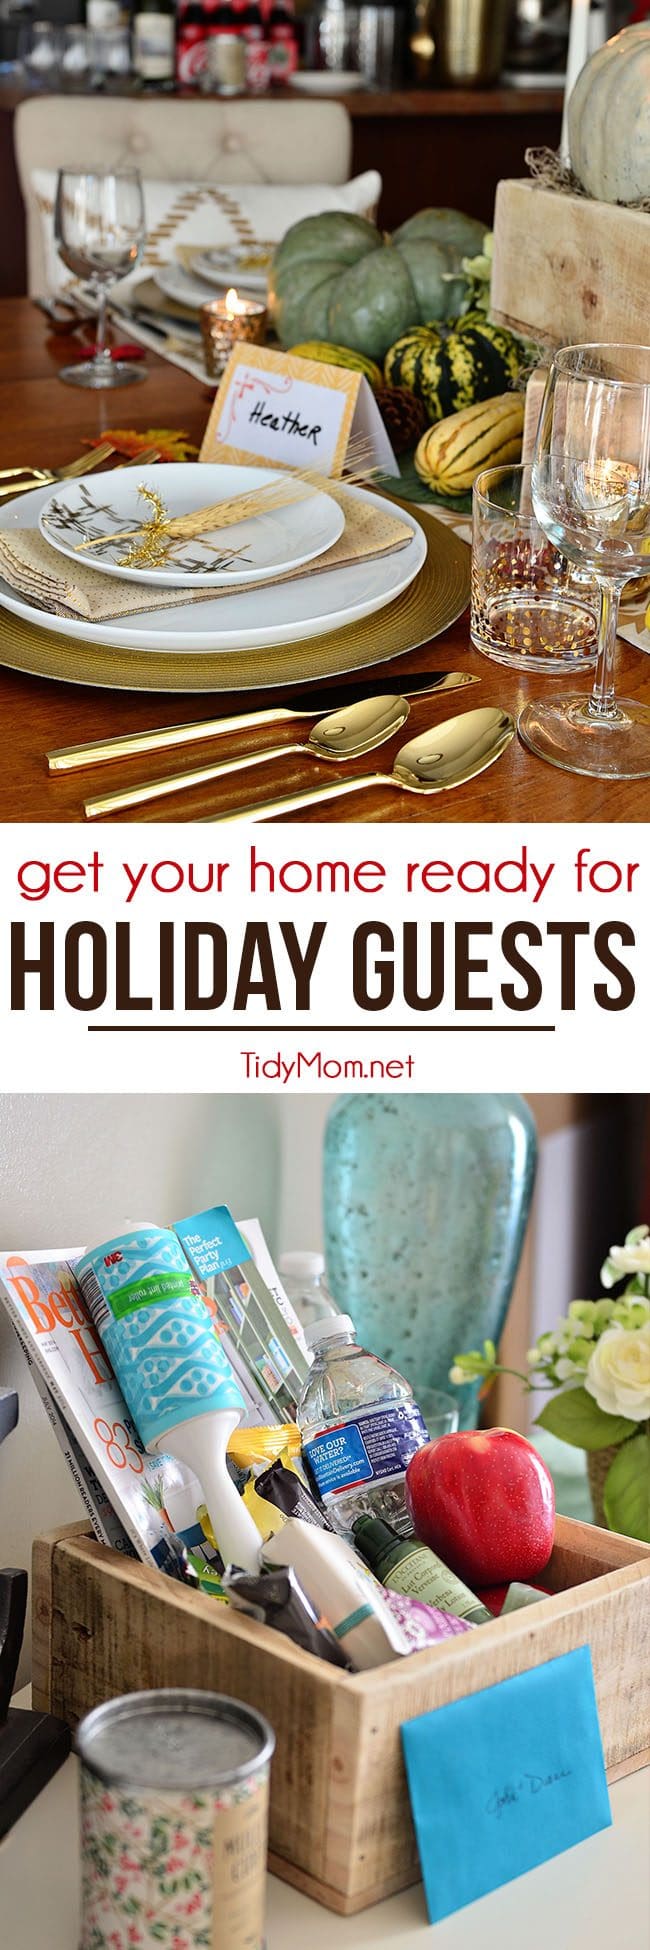 The holidays often involve party and overnight guests. Follow these holiday tips to get your home ready for guests. Such as, providing overnight guests with a small basket of things they might. Quick cleaning tip with Scotch-Brite cleaning tools and more at TidyMom.net